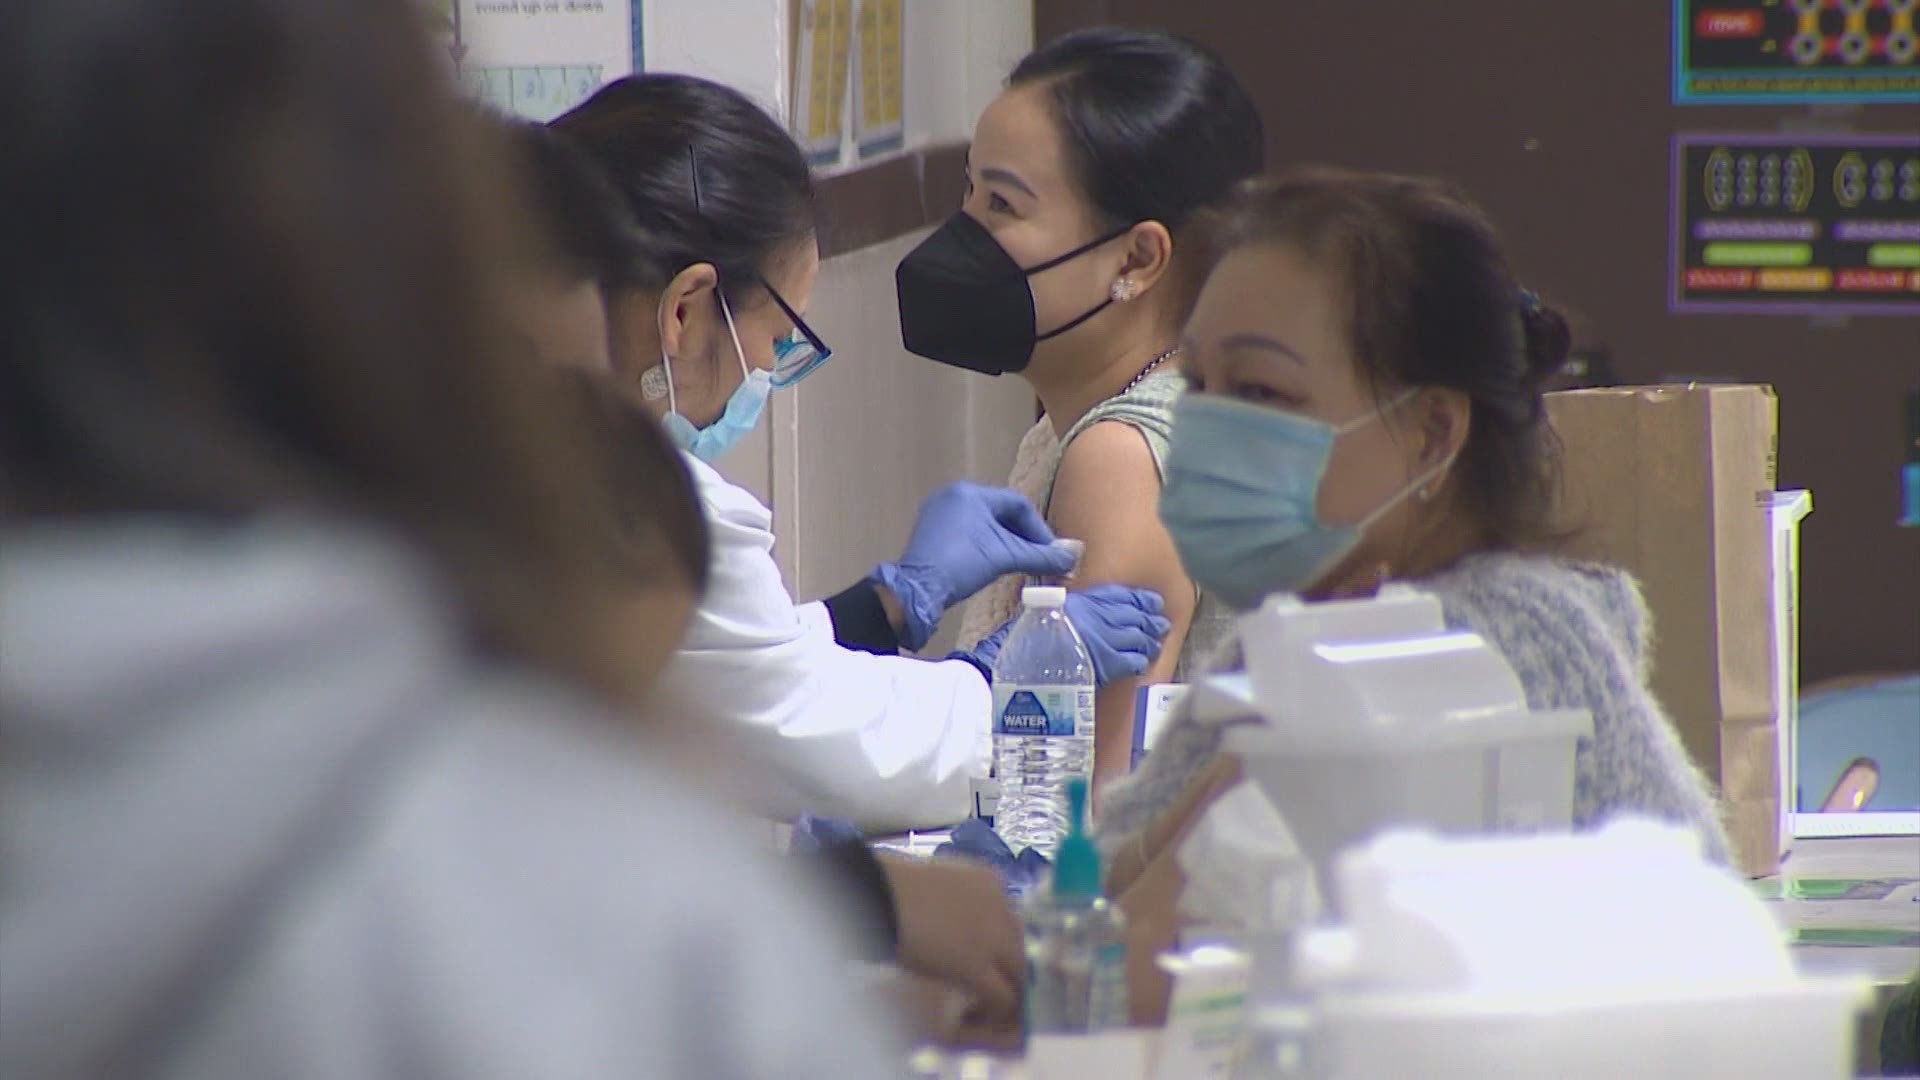 Hispanic community leaders in western Washington say Latinx people are lagging behind in vaccination numbers and they hope to turn that around.